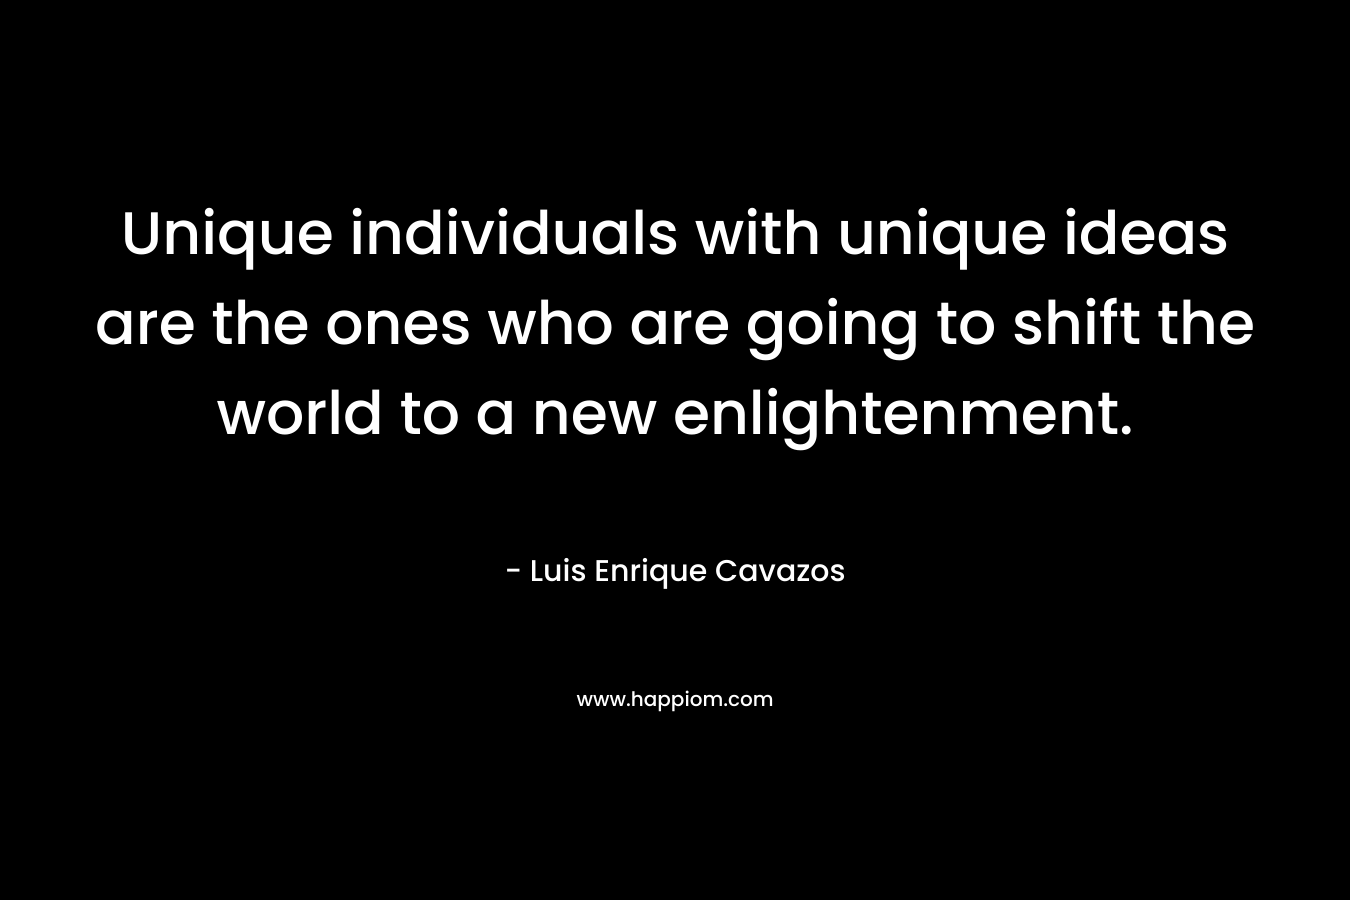 Unique individuals with unique ideas are the ones who are going to shift the world to a new enlightenment.